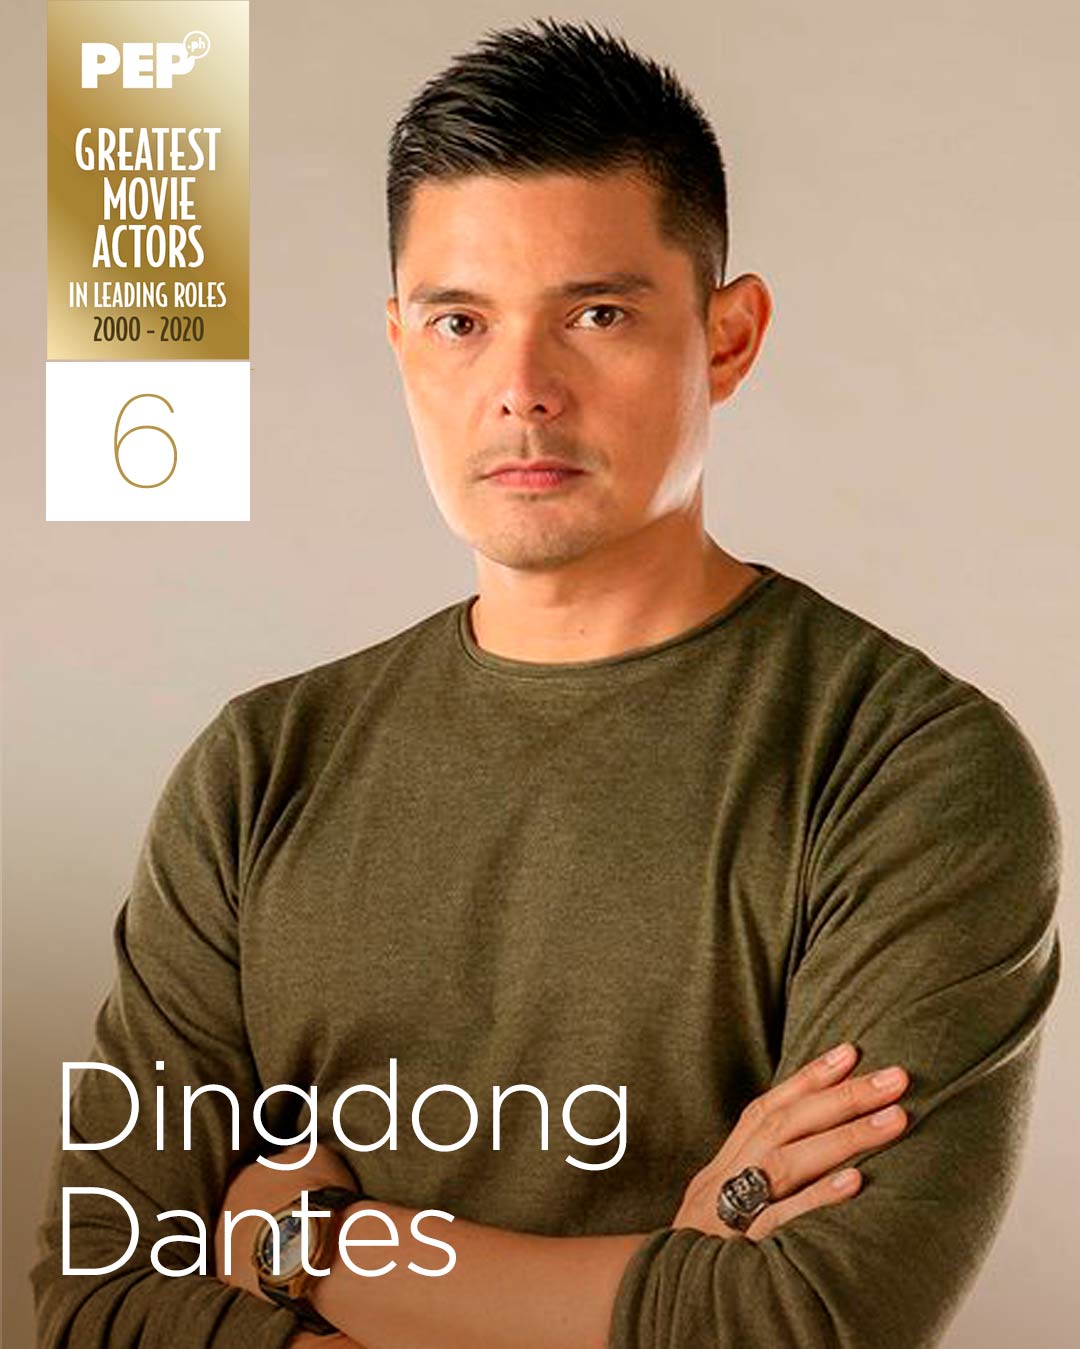 Dingdong Dantes, 15 Greatest Movie Actors in Leading Roles